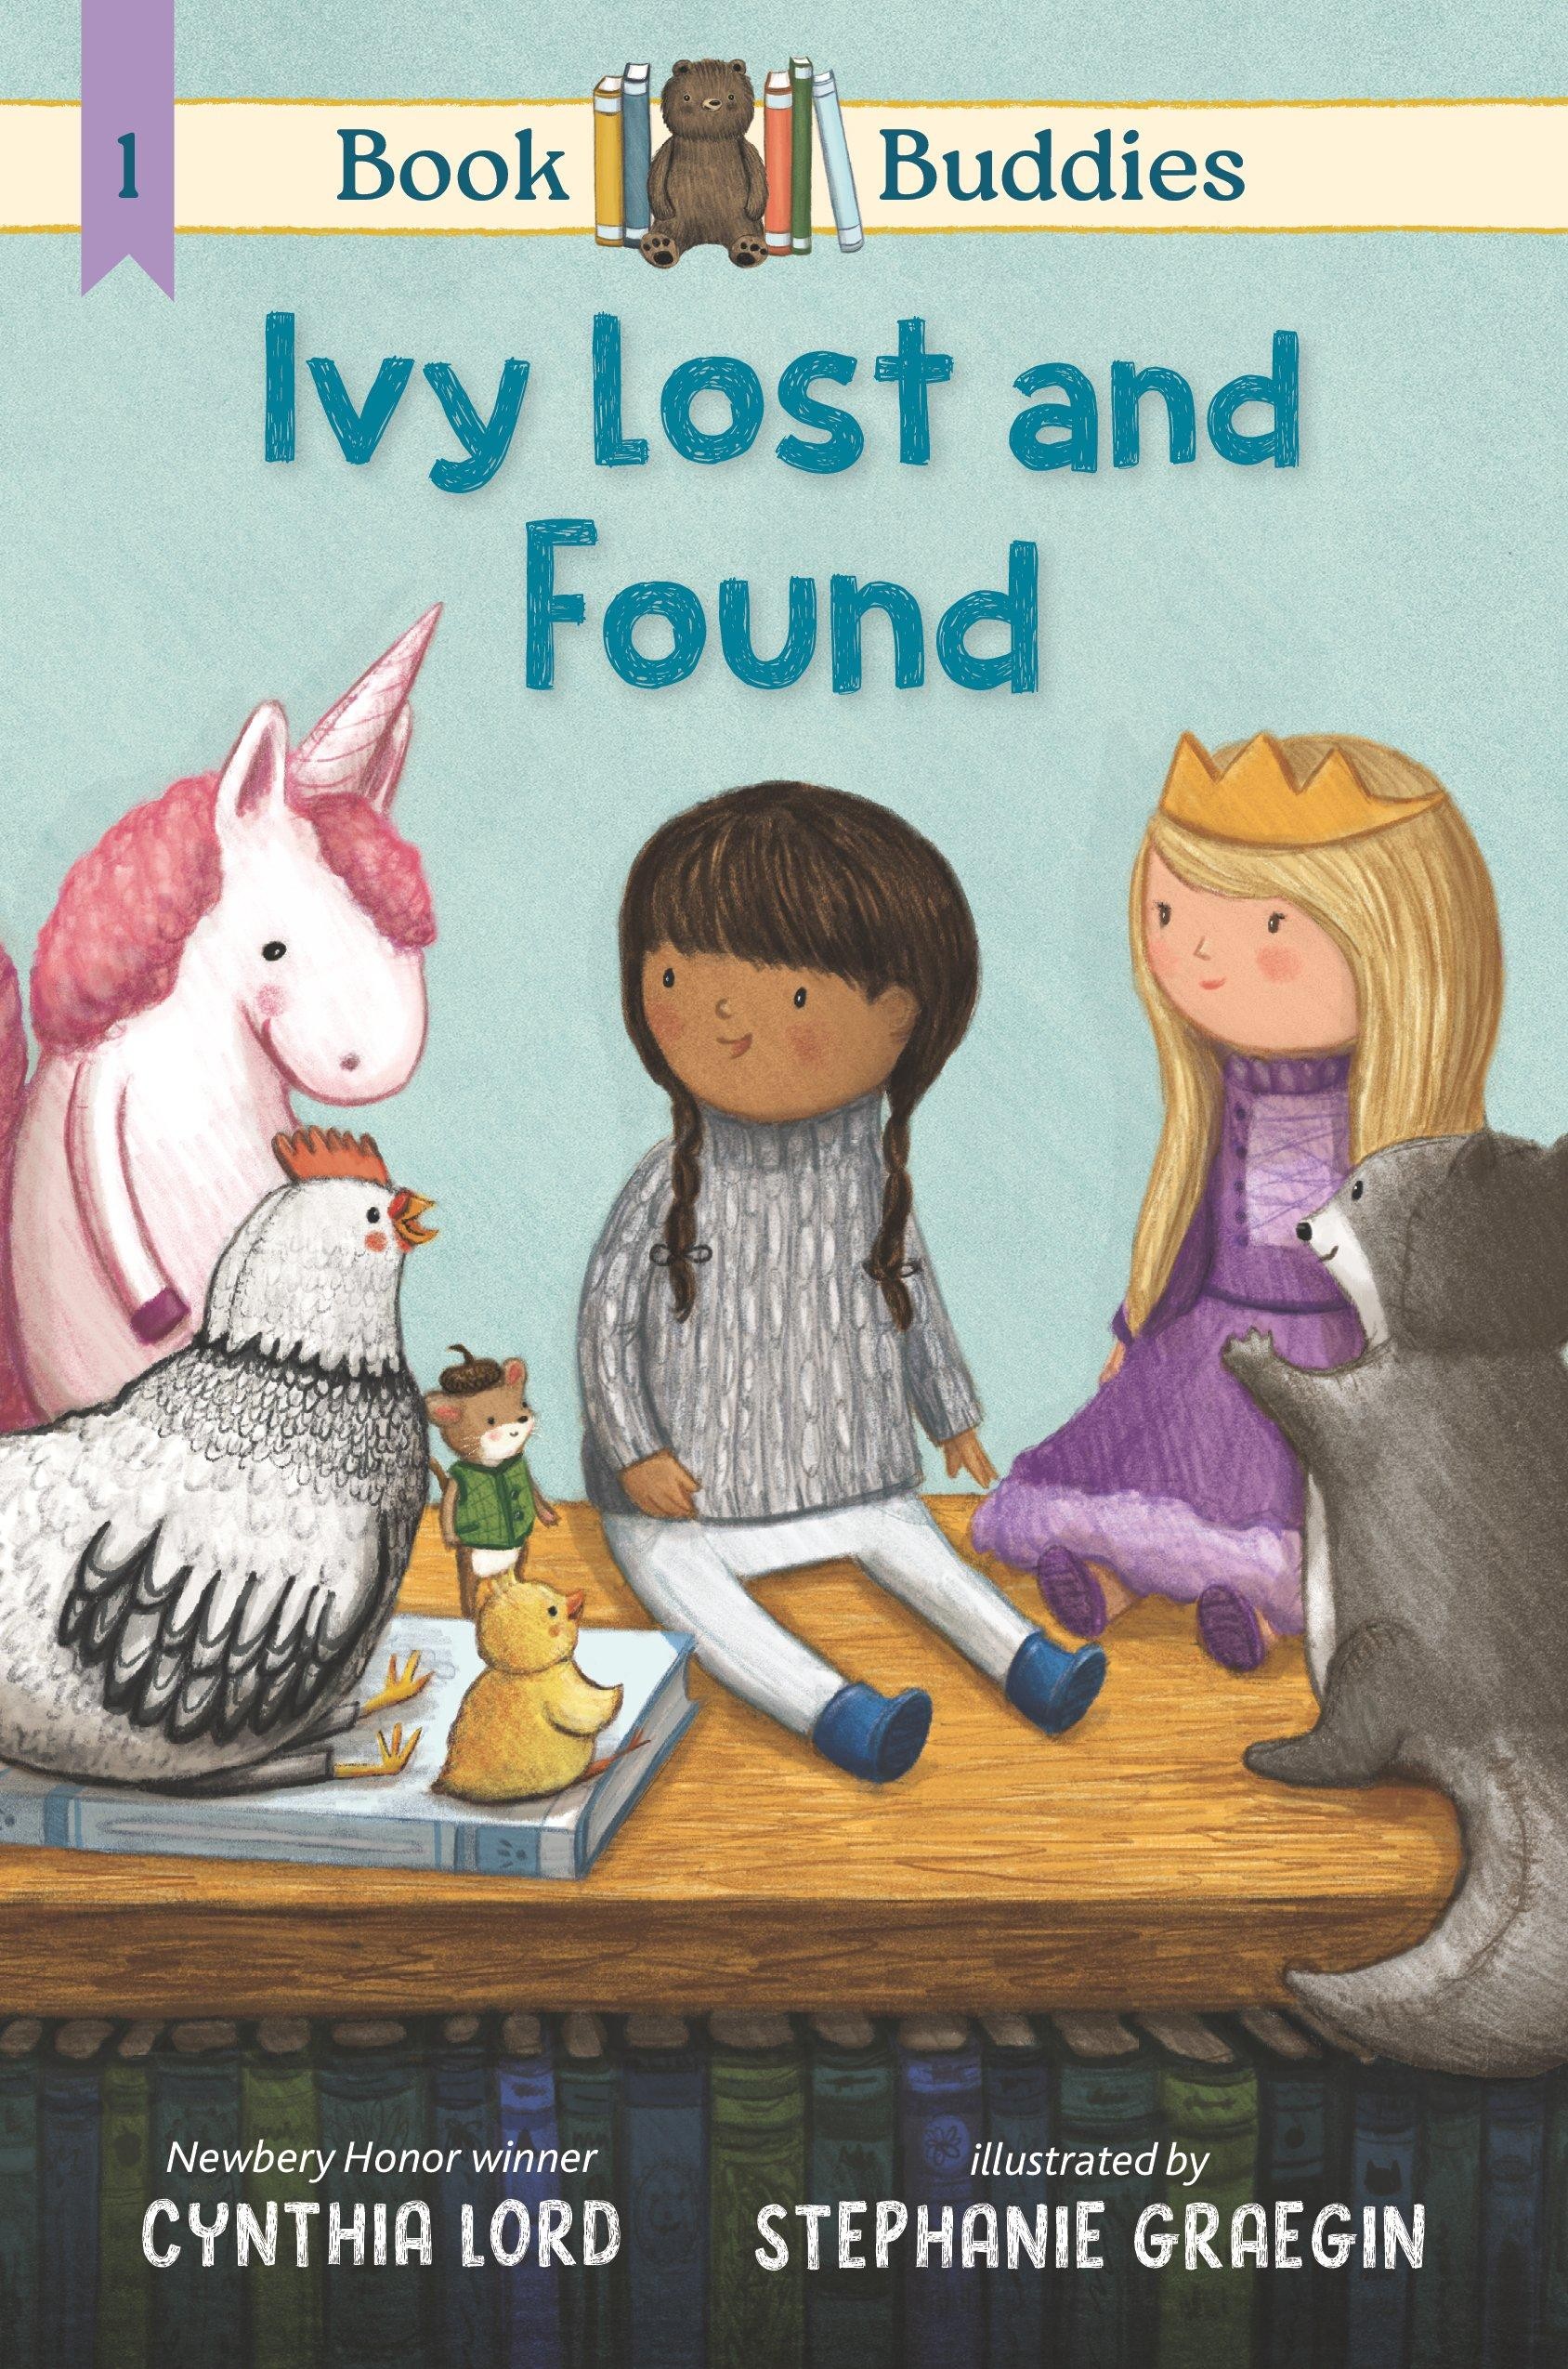 IVY LOST AND FOUND (Book Buddies) by Cynthia Lord